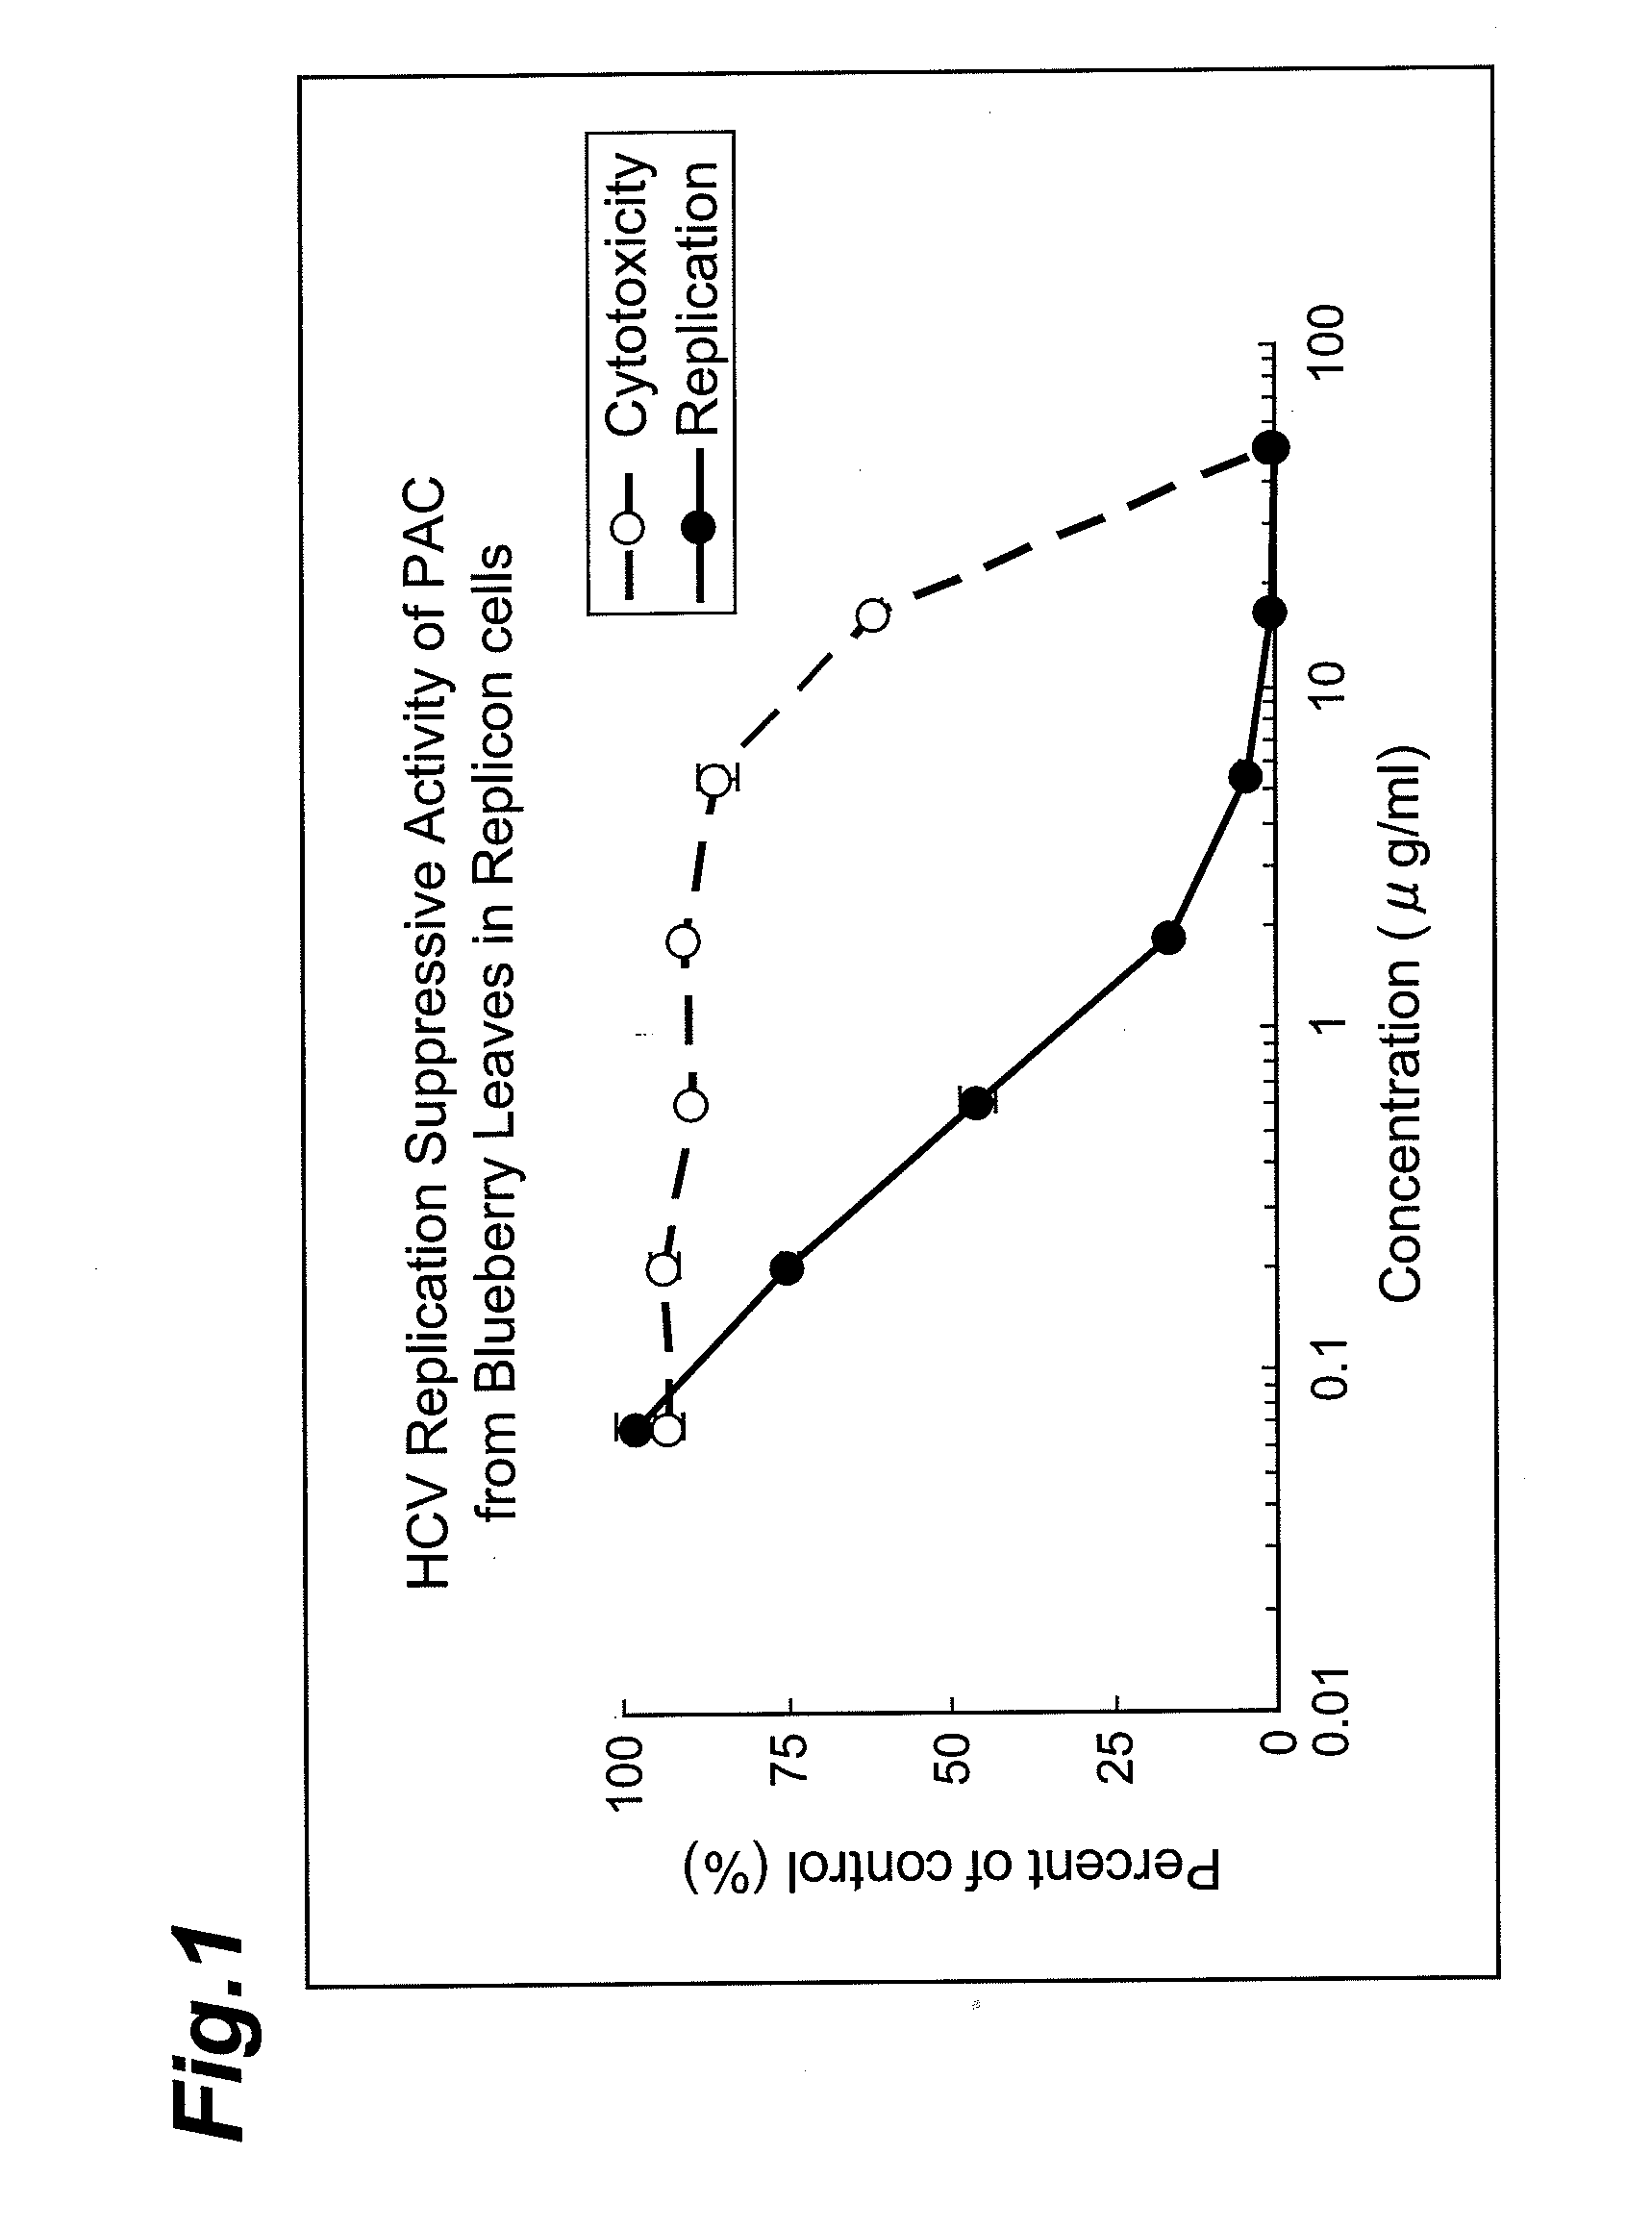 Agent for inhibiting production of hepatitis c virus and its use